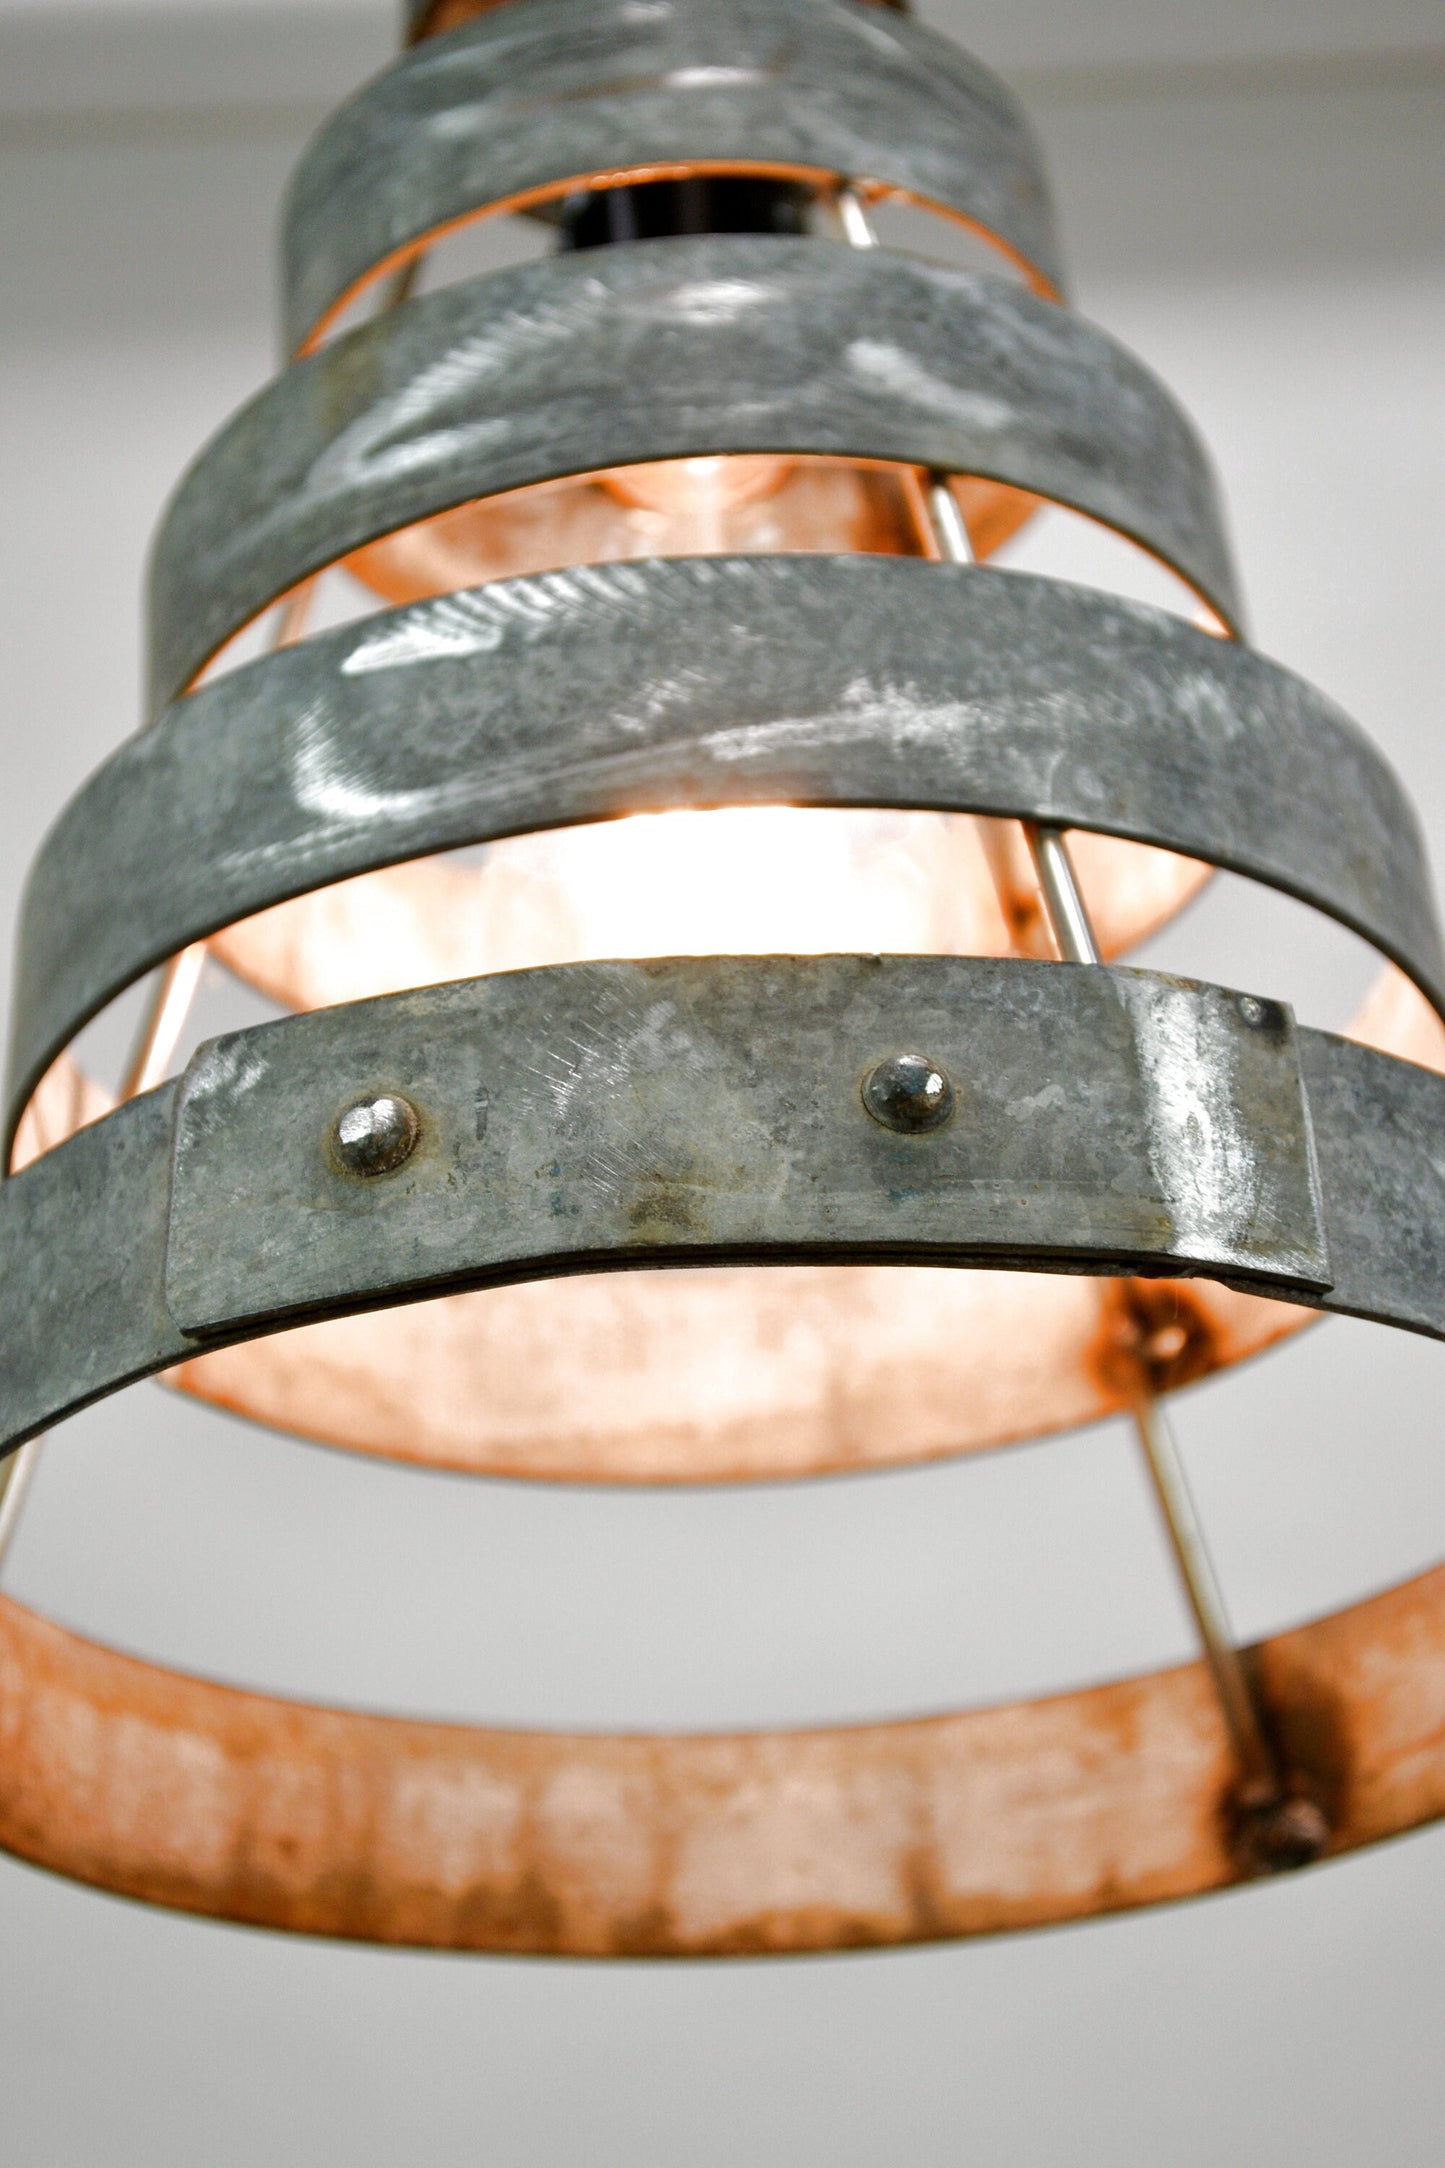 Wine Barrel Ring Pendant Light - Keila - Made from retired California wine barrel rings - 100% Recycled!